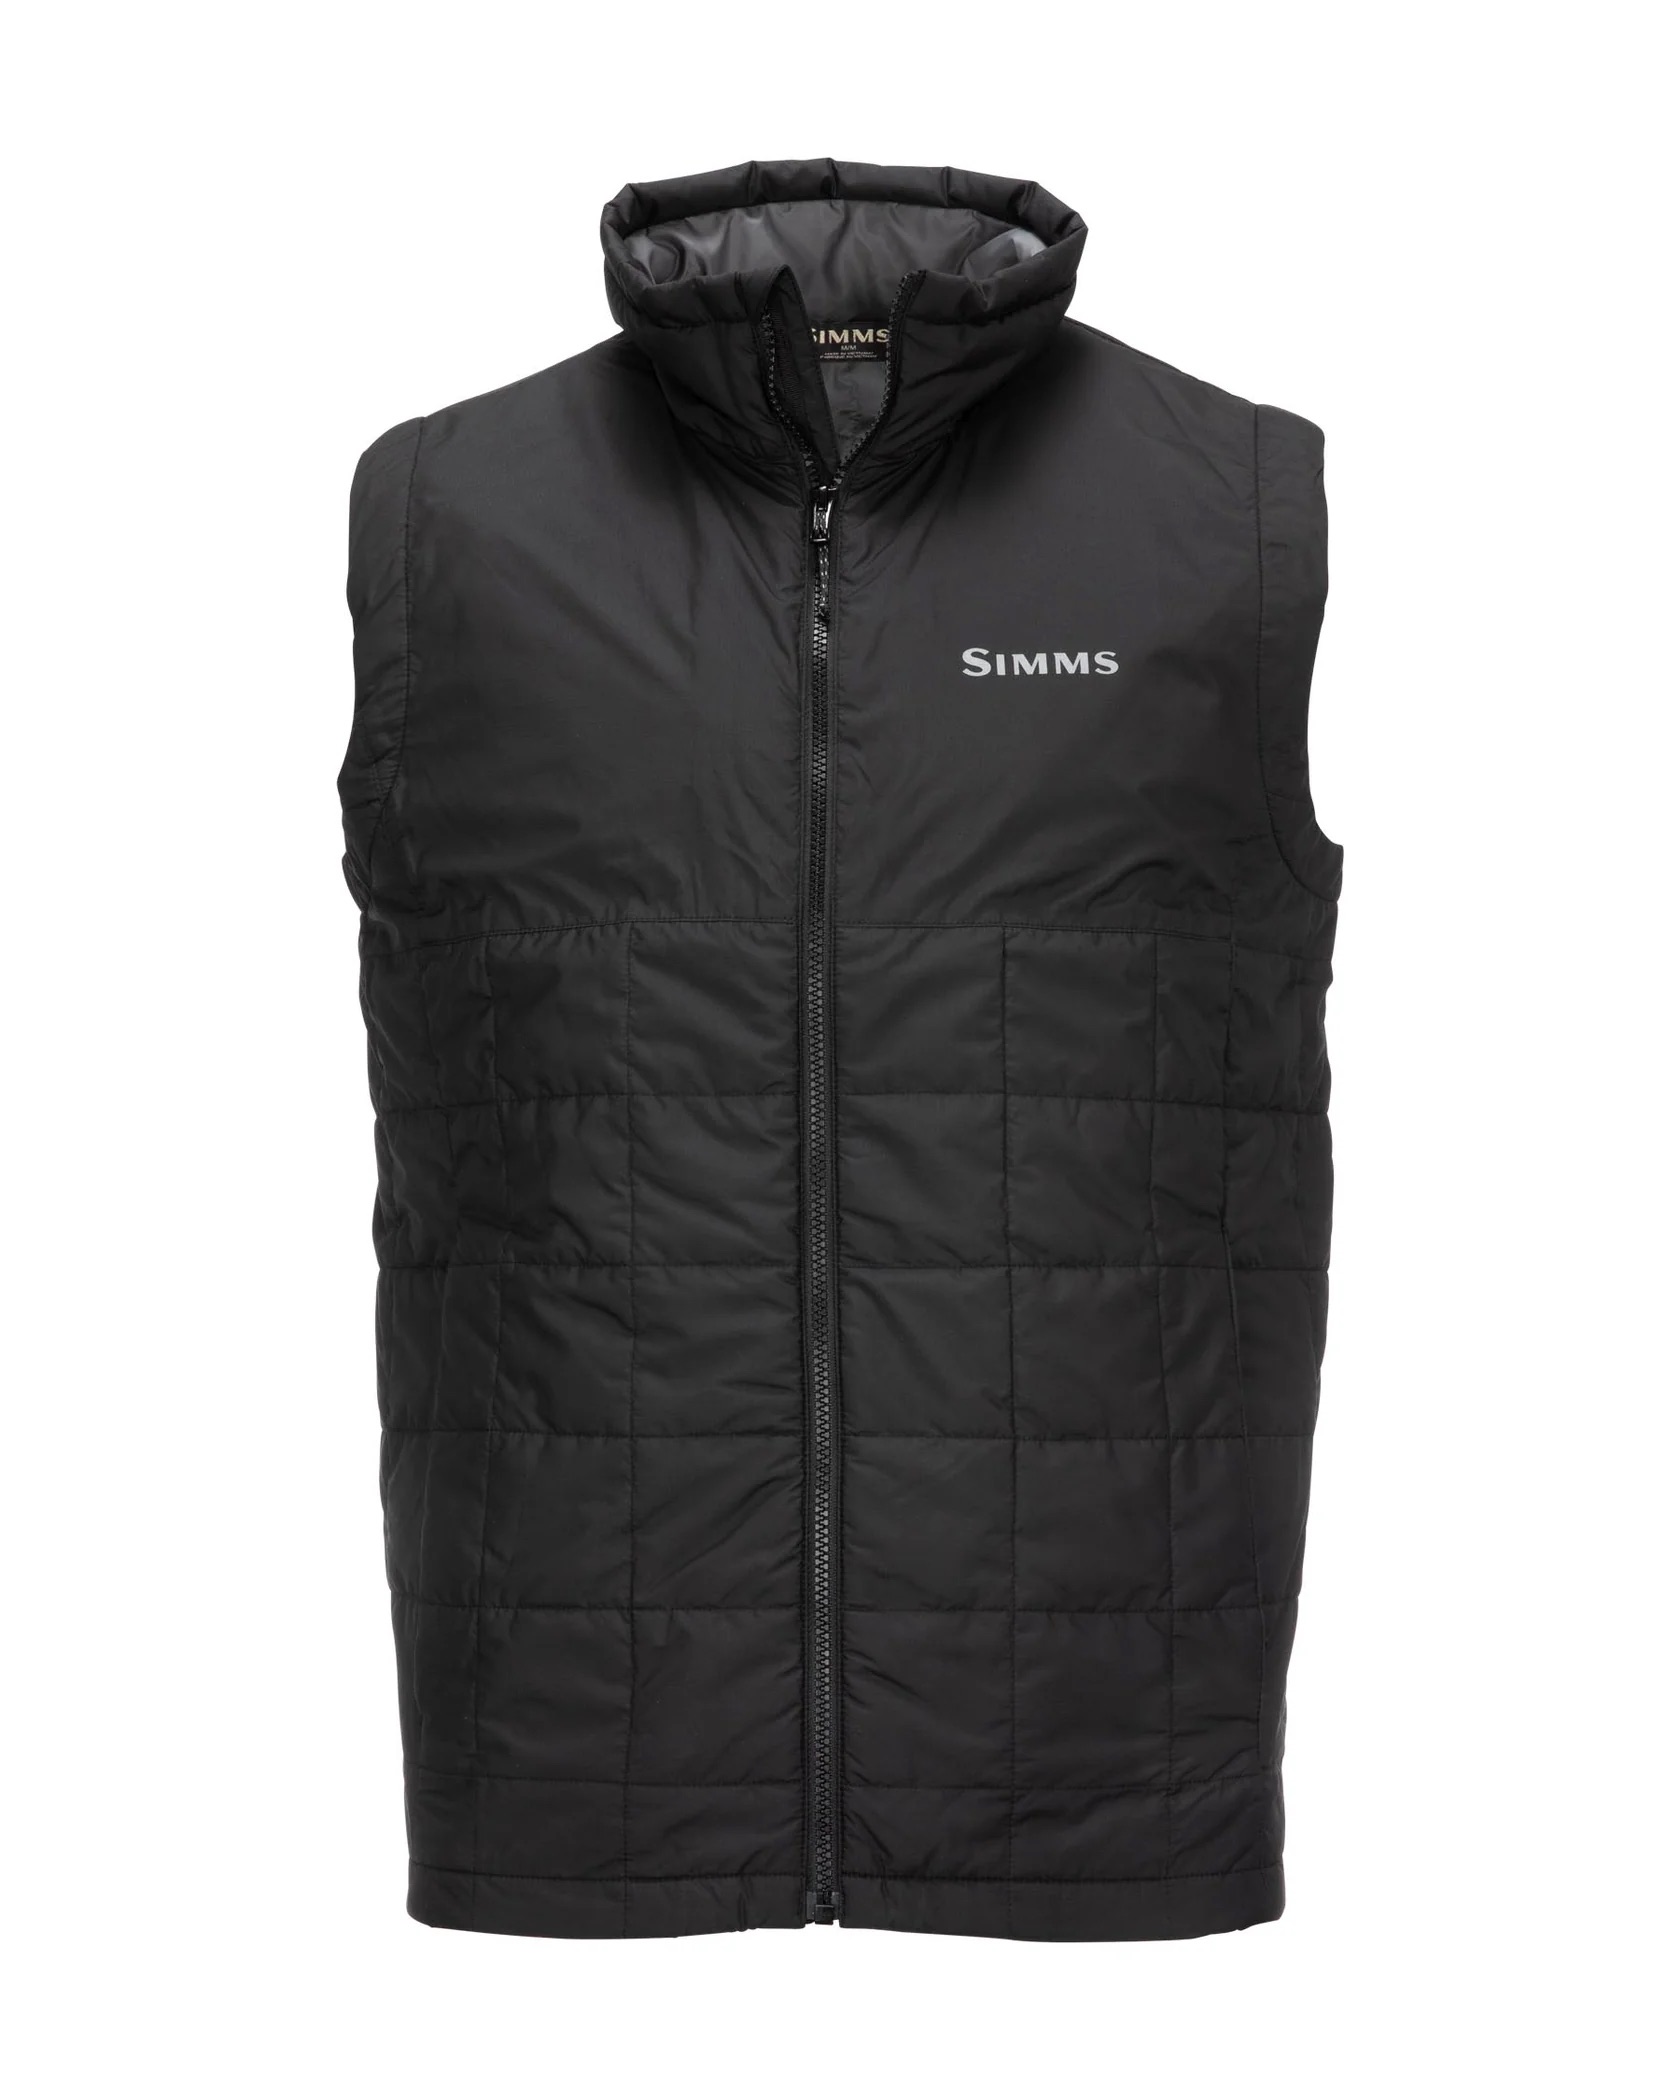 Simms M's Fall Run Insulated Vest - Black w/ M&Y Logo - Large